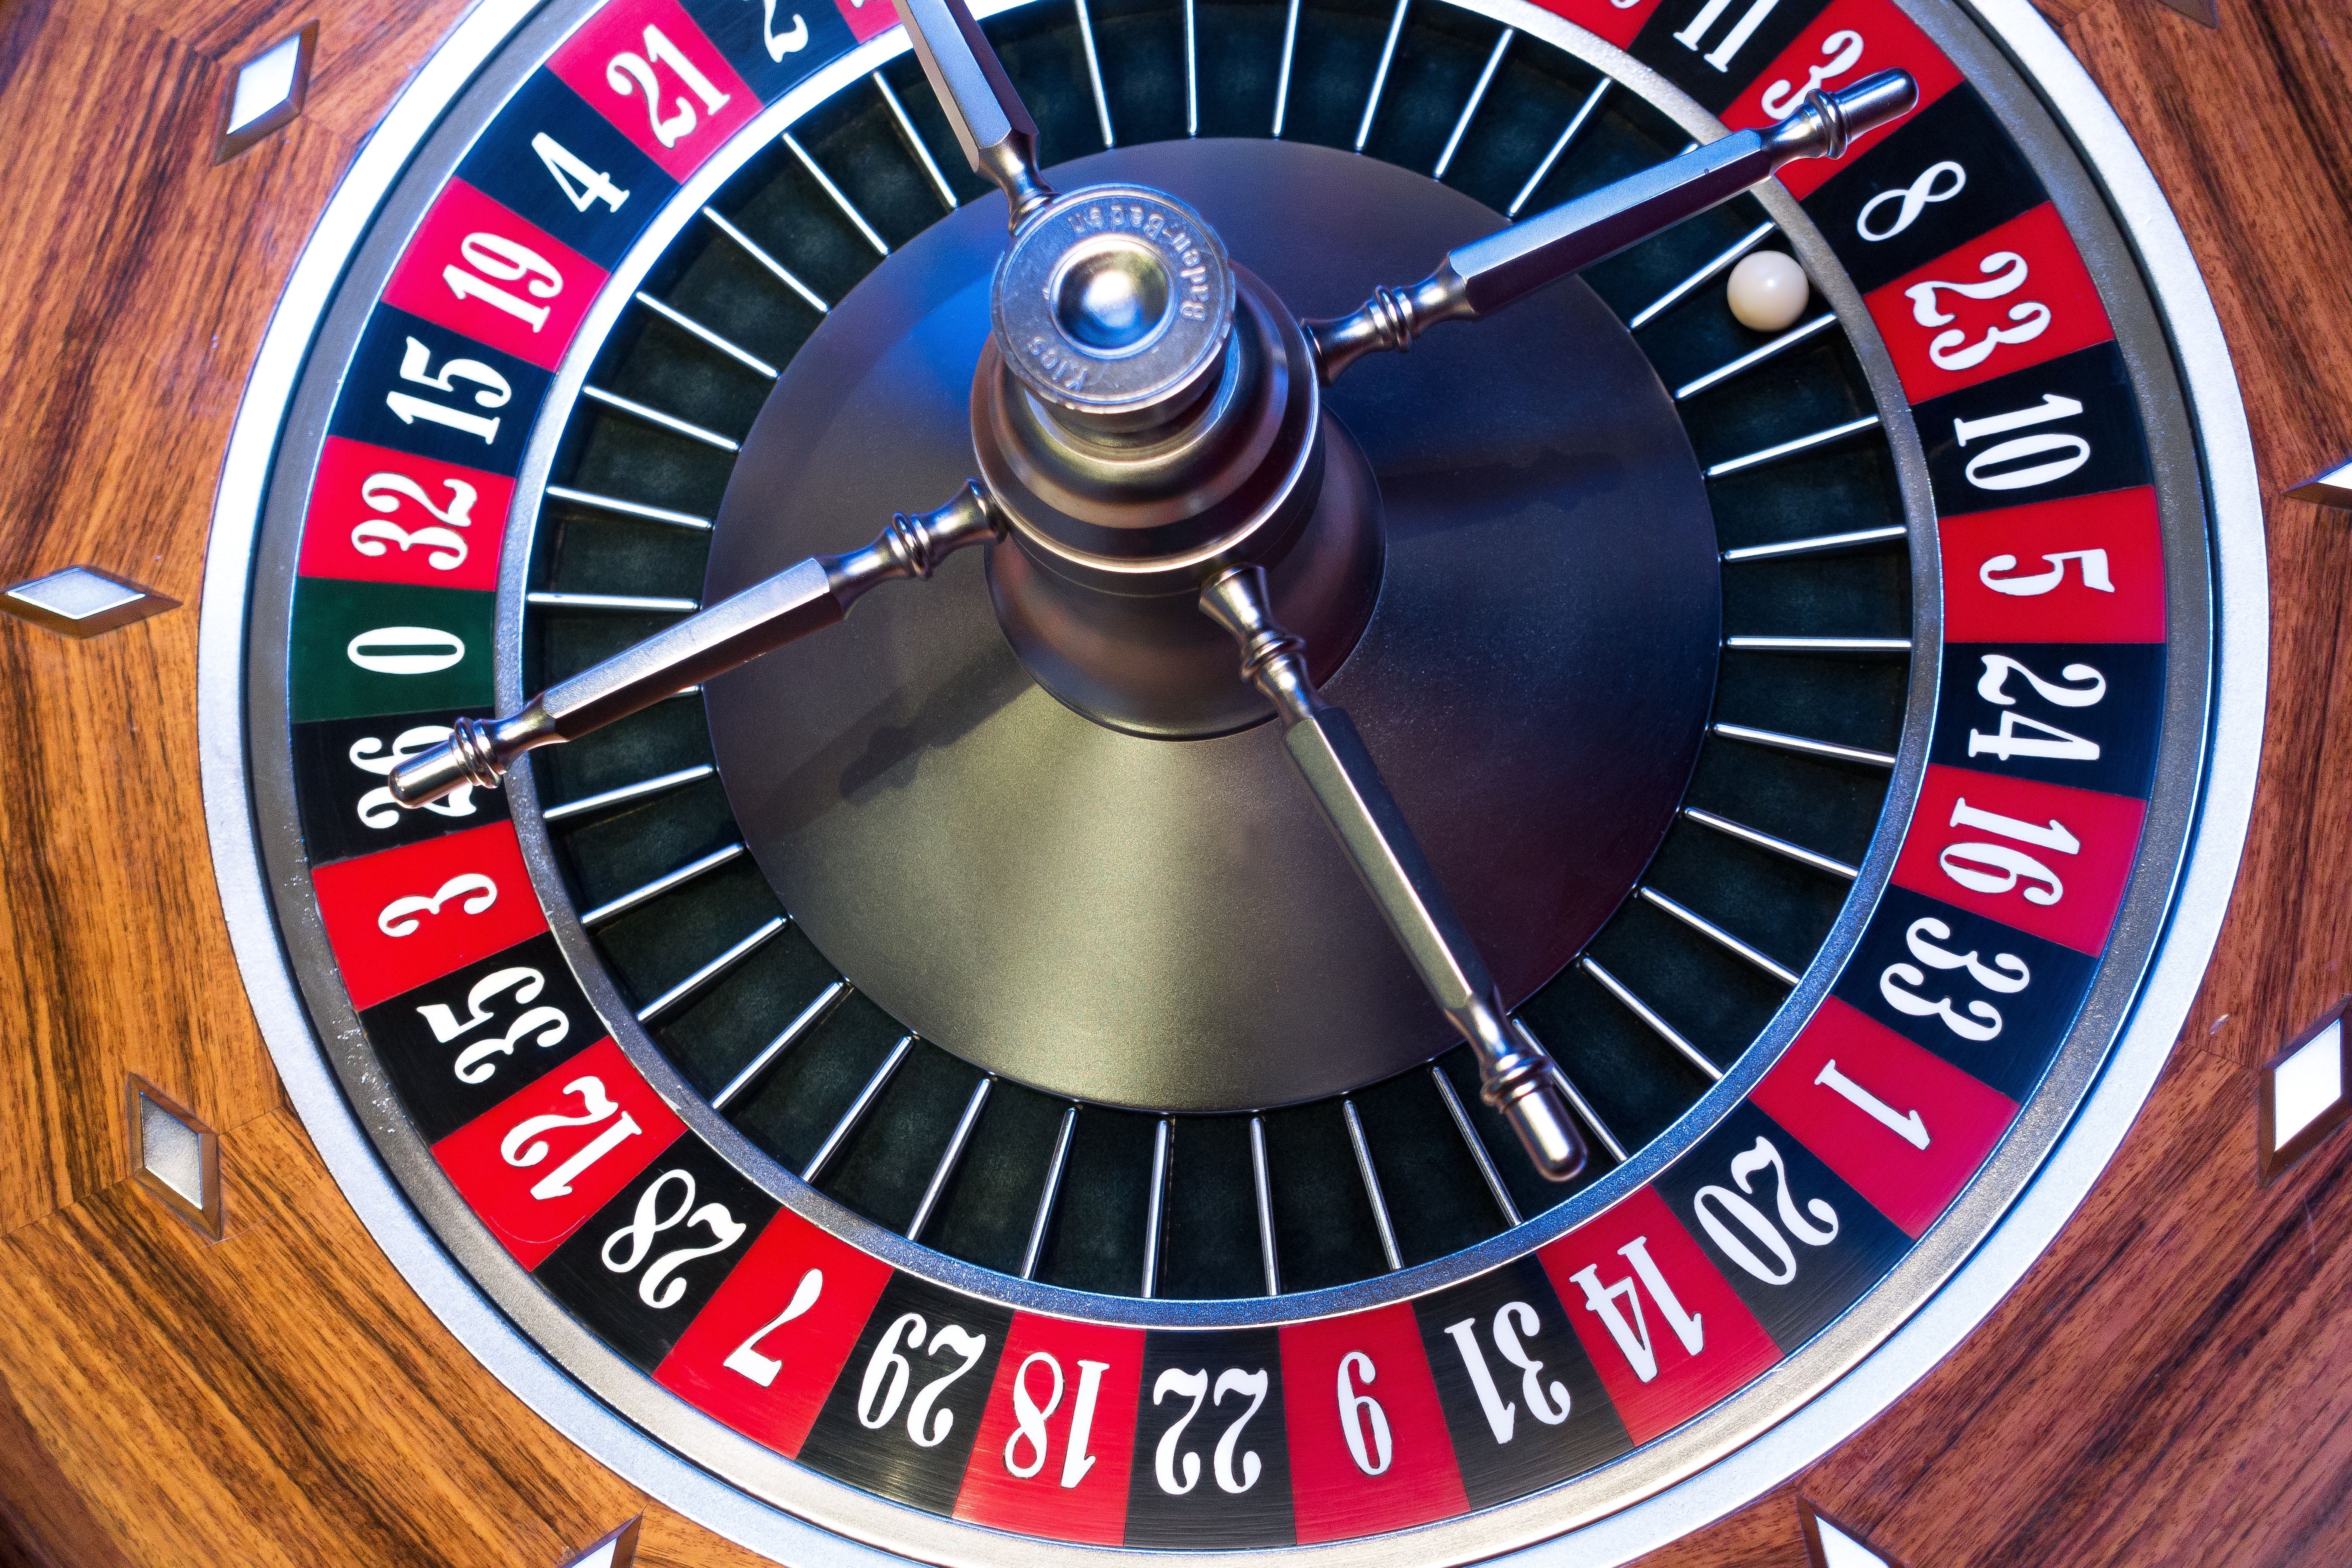 Roulette odds on color